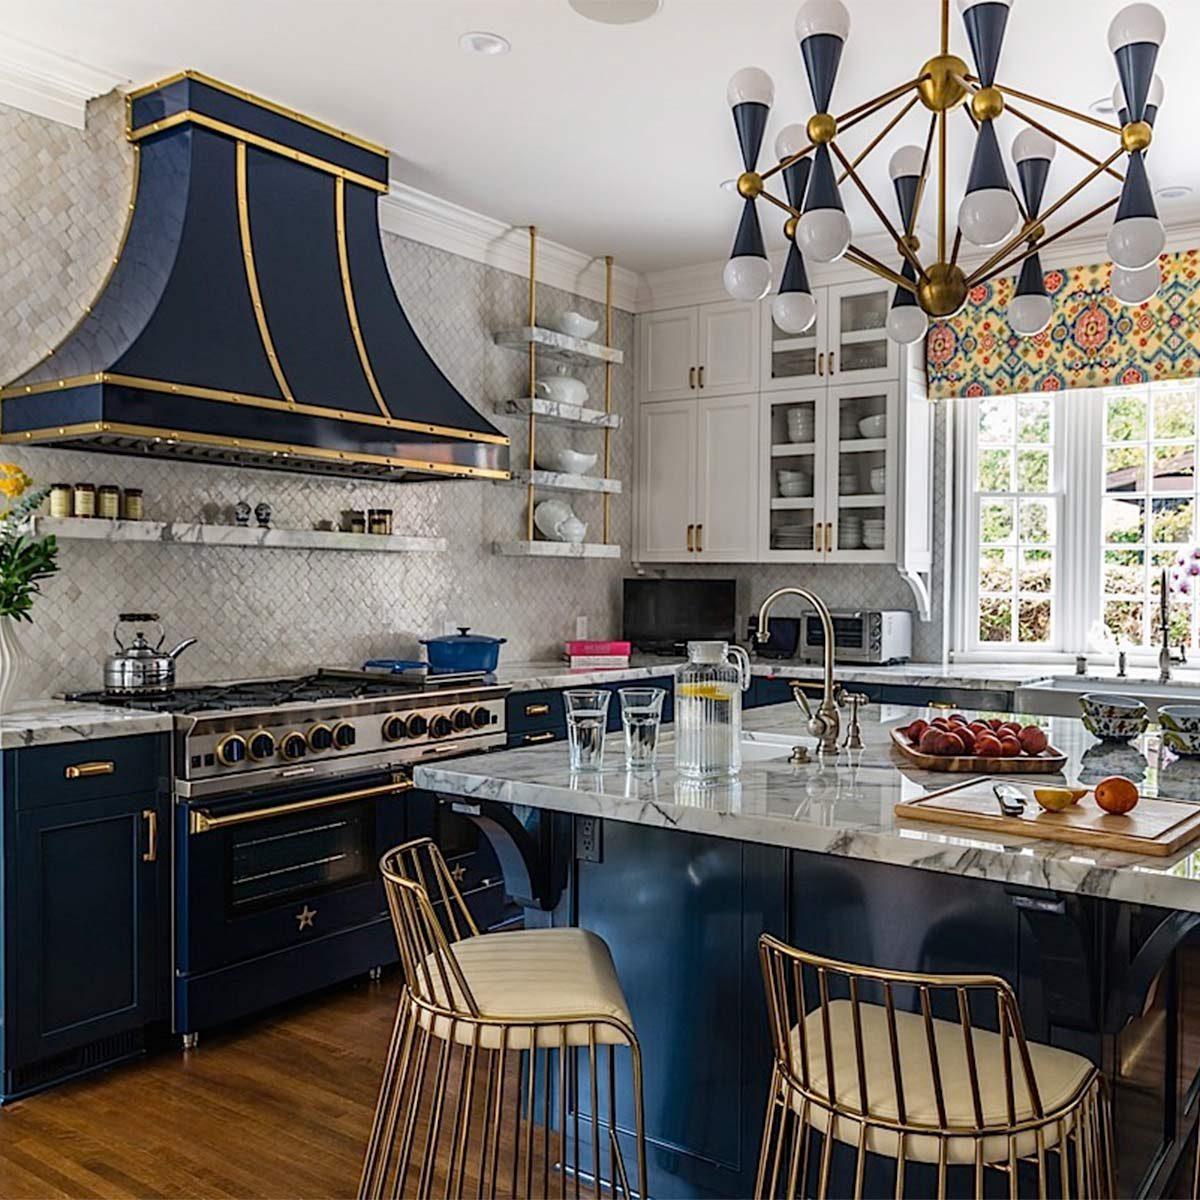 6 Incredible Kitchen Remodeling Ideas